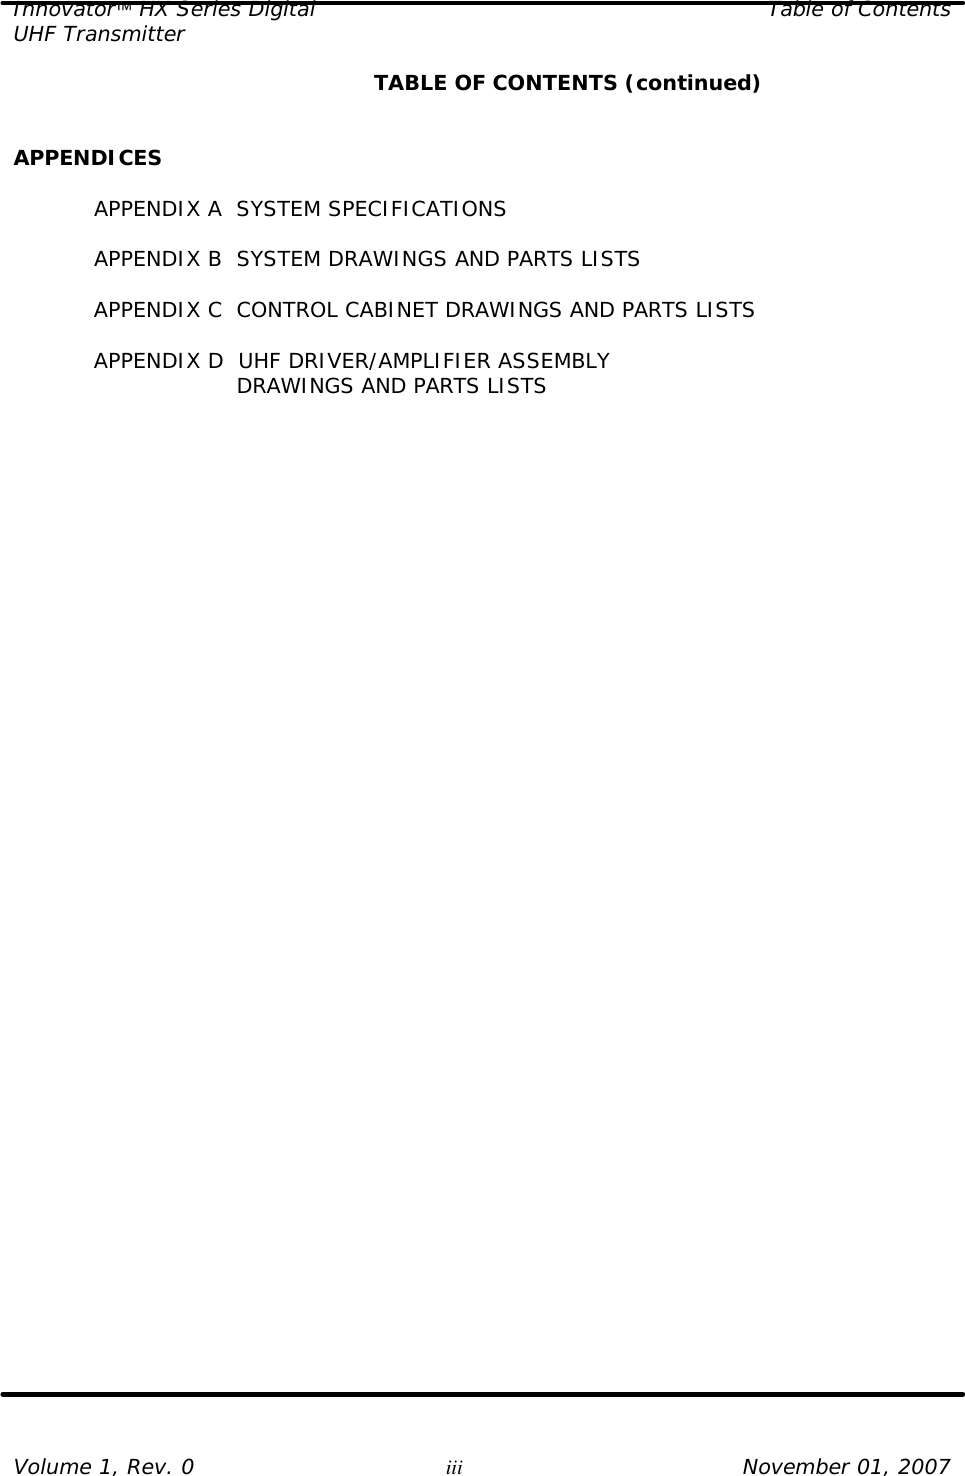 Innovator HX Series Digital Table of Contents UHF Transmitter  Volume 1, Rev. 0 iii November 01, 2007     TABLE OF CONTENTS (continued)   APPENDICES  APPENDIX A  SYSTEM SPECIFICATIONS  APPENDIX B  SYSTEM DRAWINGS AND PARTS LISTS  APPENDIX C  CONTROL CABINET DRAWINGS AND PARTS LISTS  APPENDIX D  UHF DRIVER/AMPLIFIER ASSEMBLY            DRAWINGS AND PARTS LISTS   